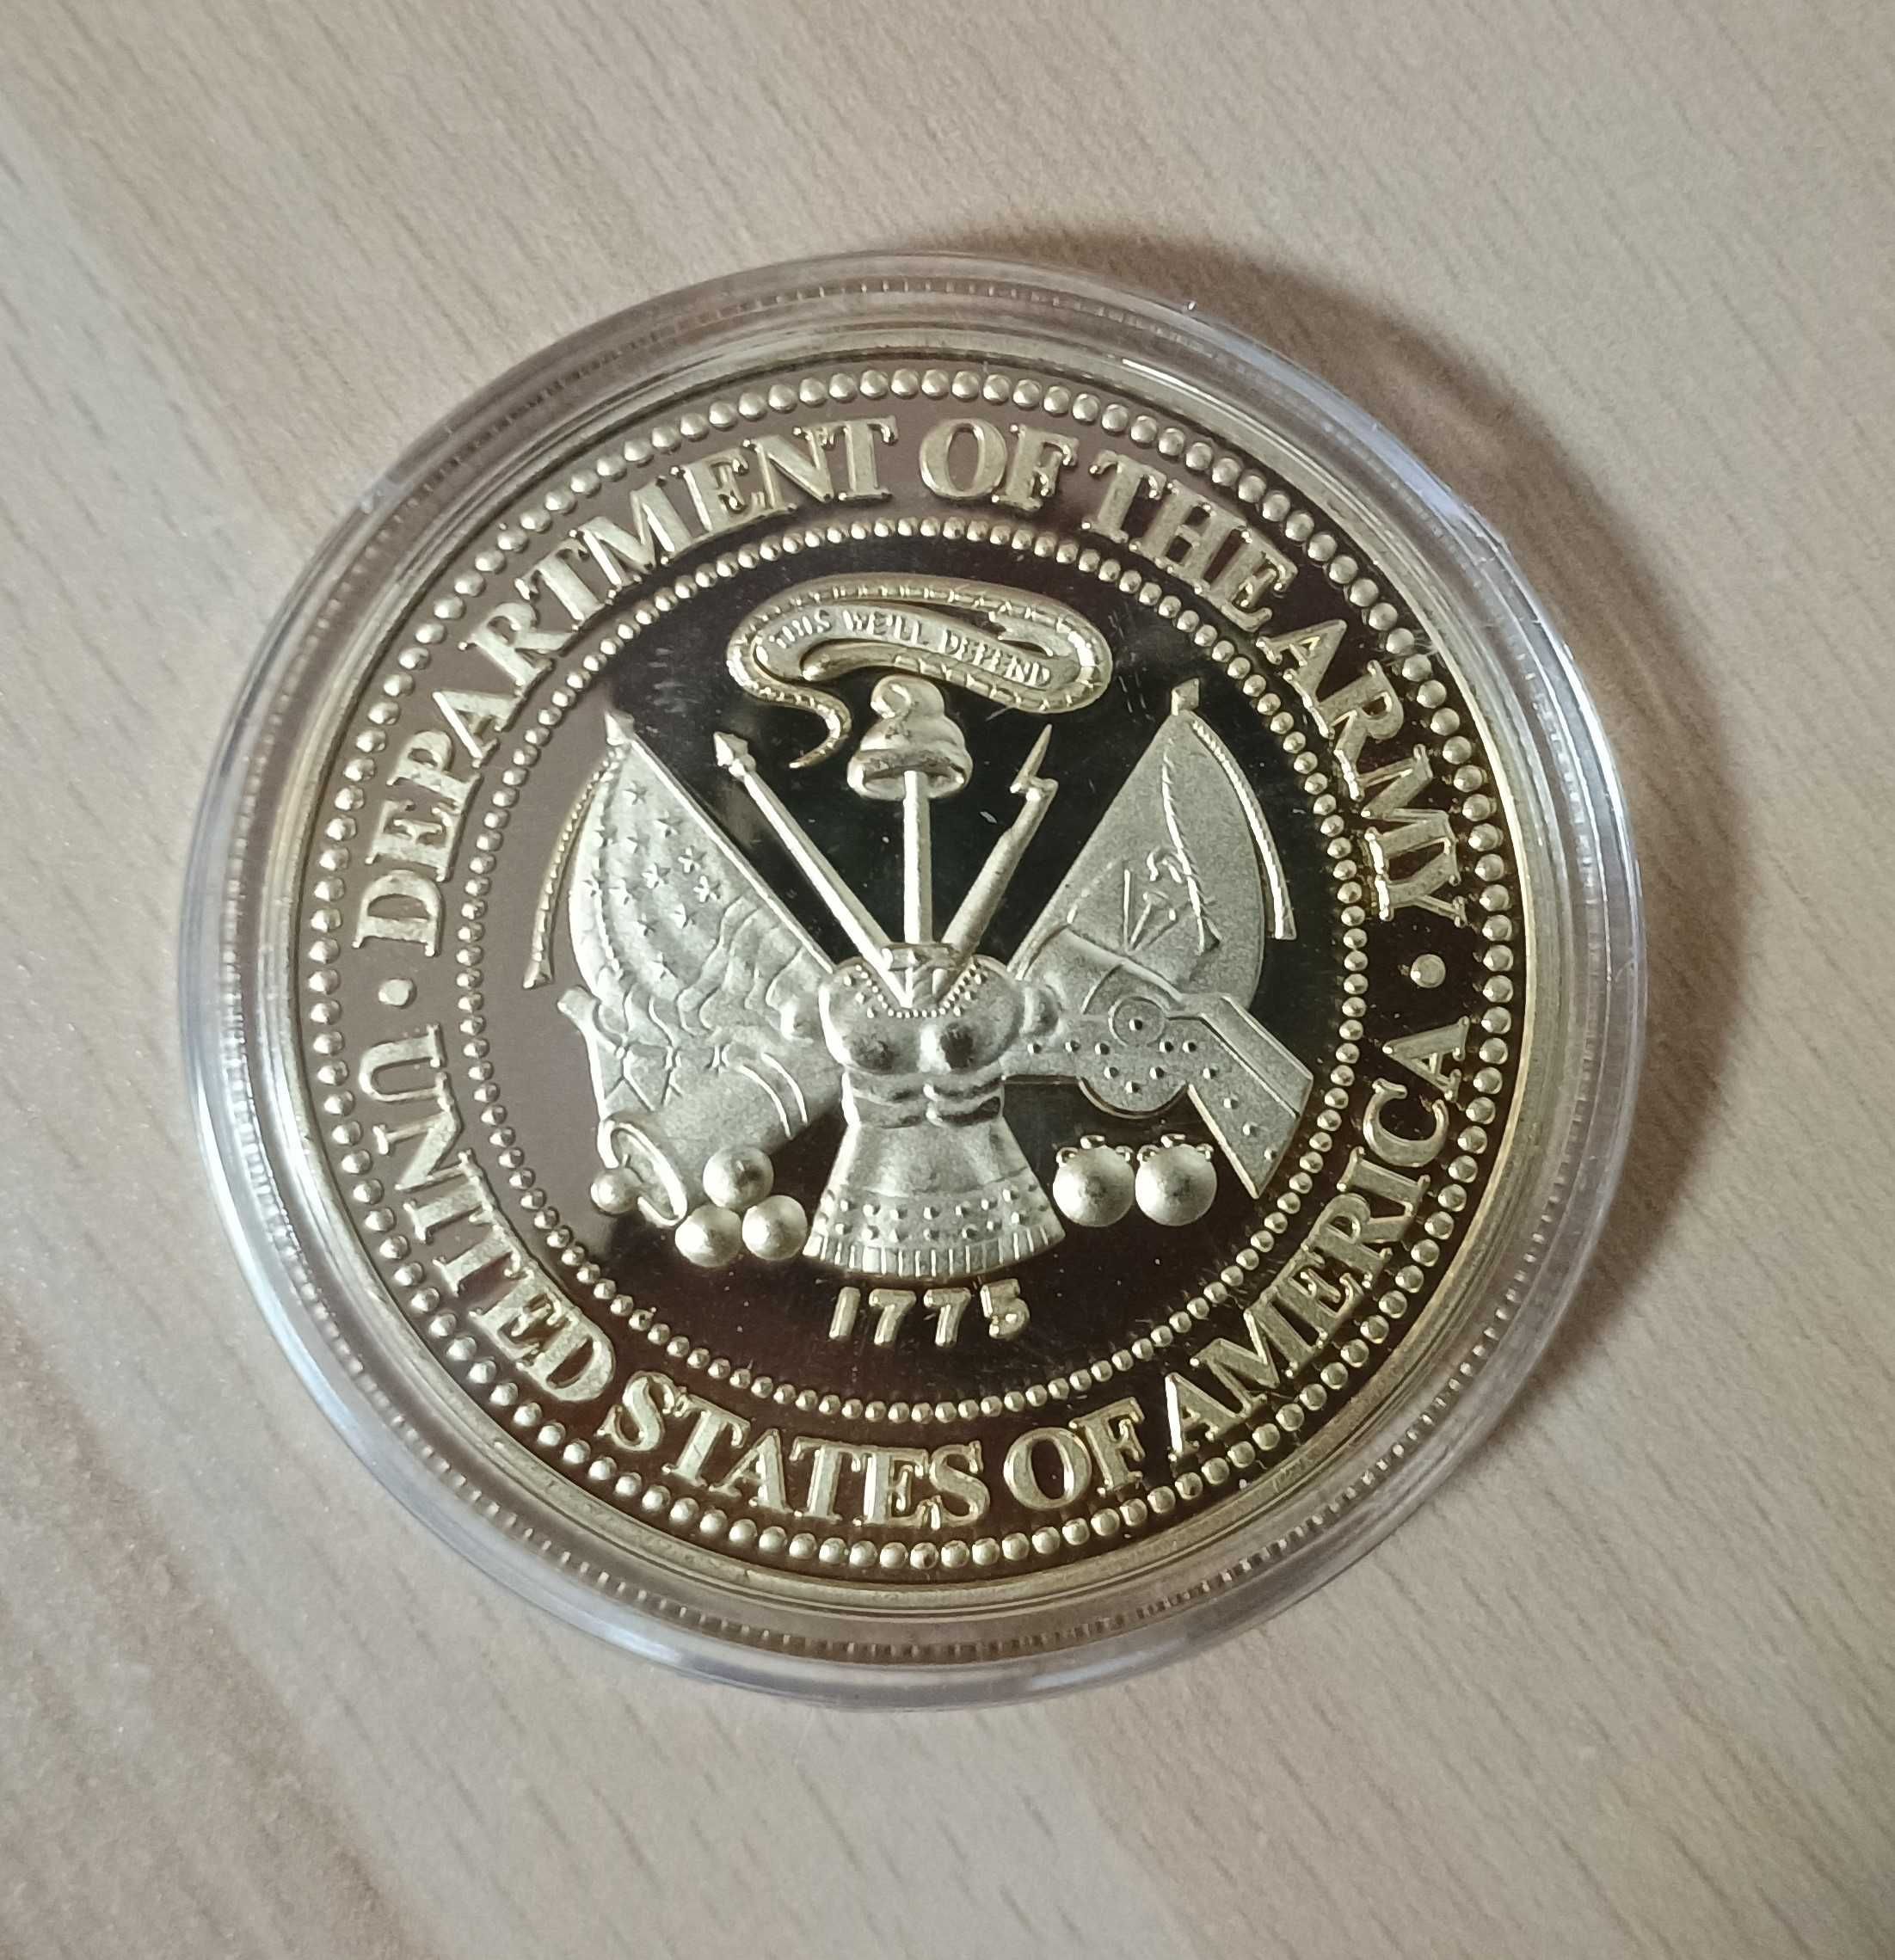 Coin 101st Airborne Division